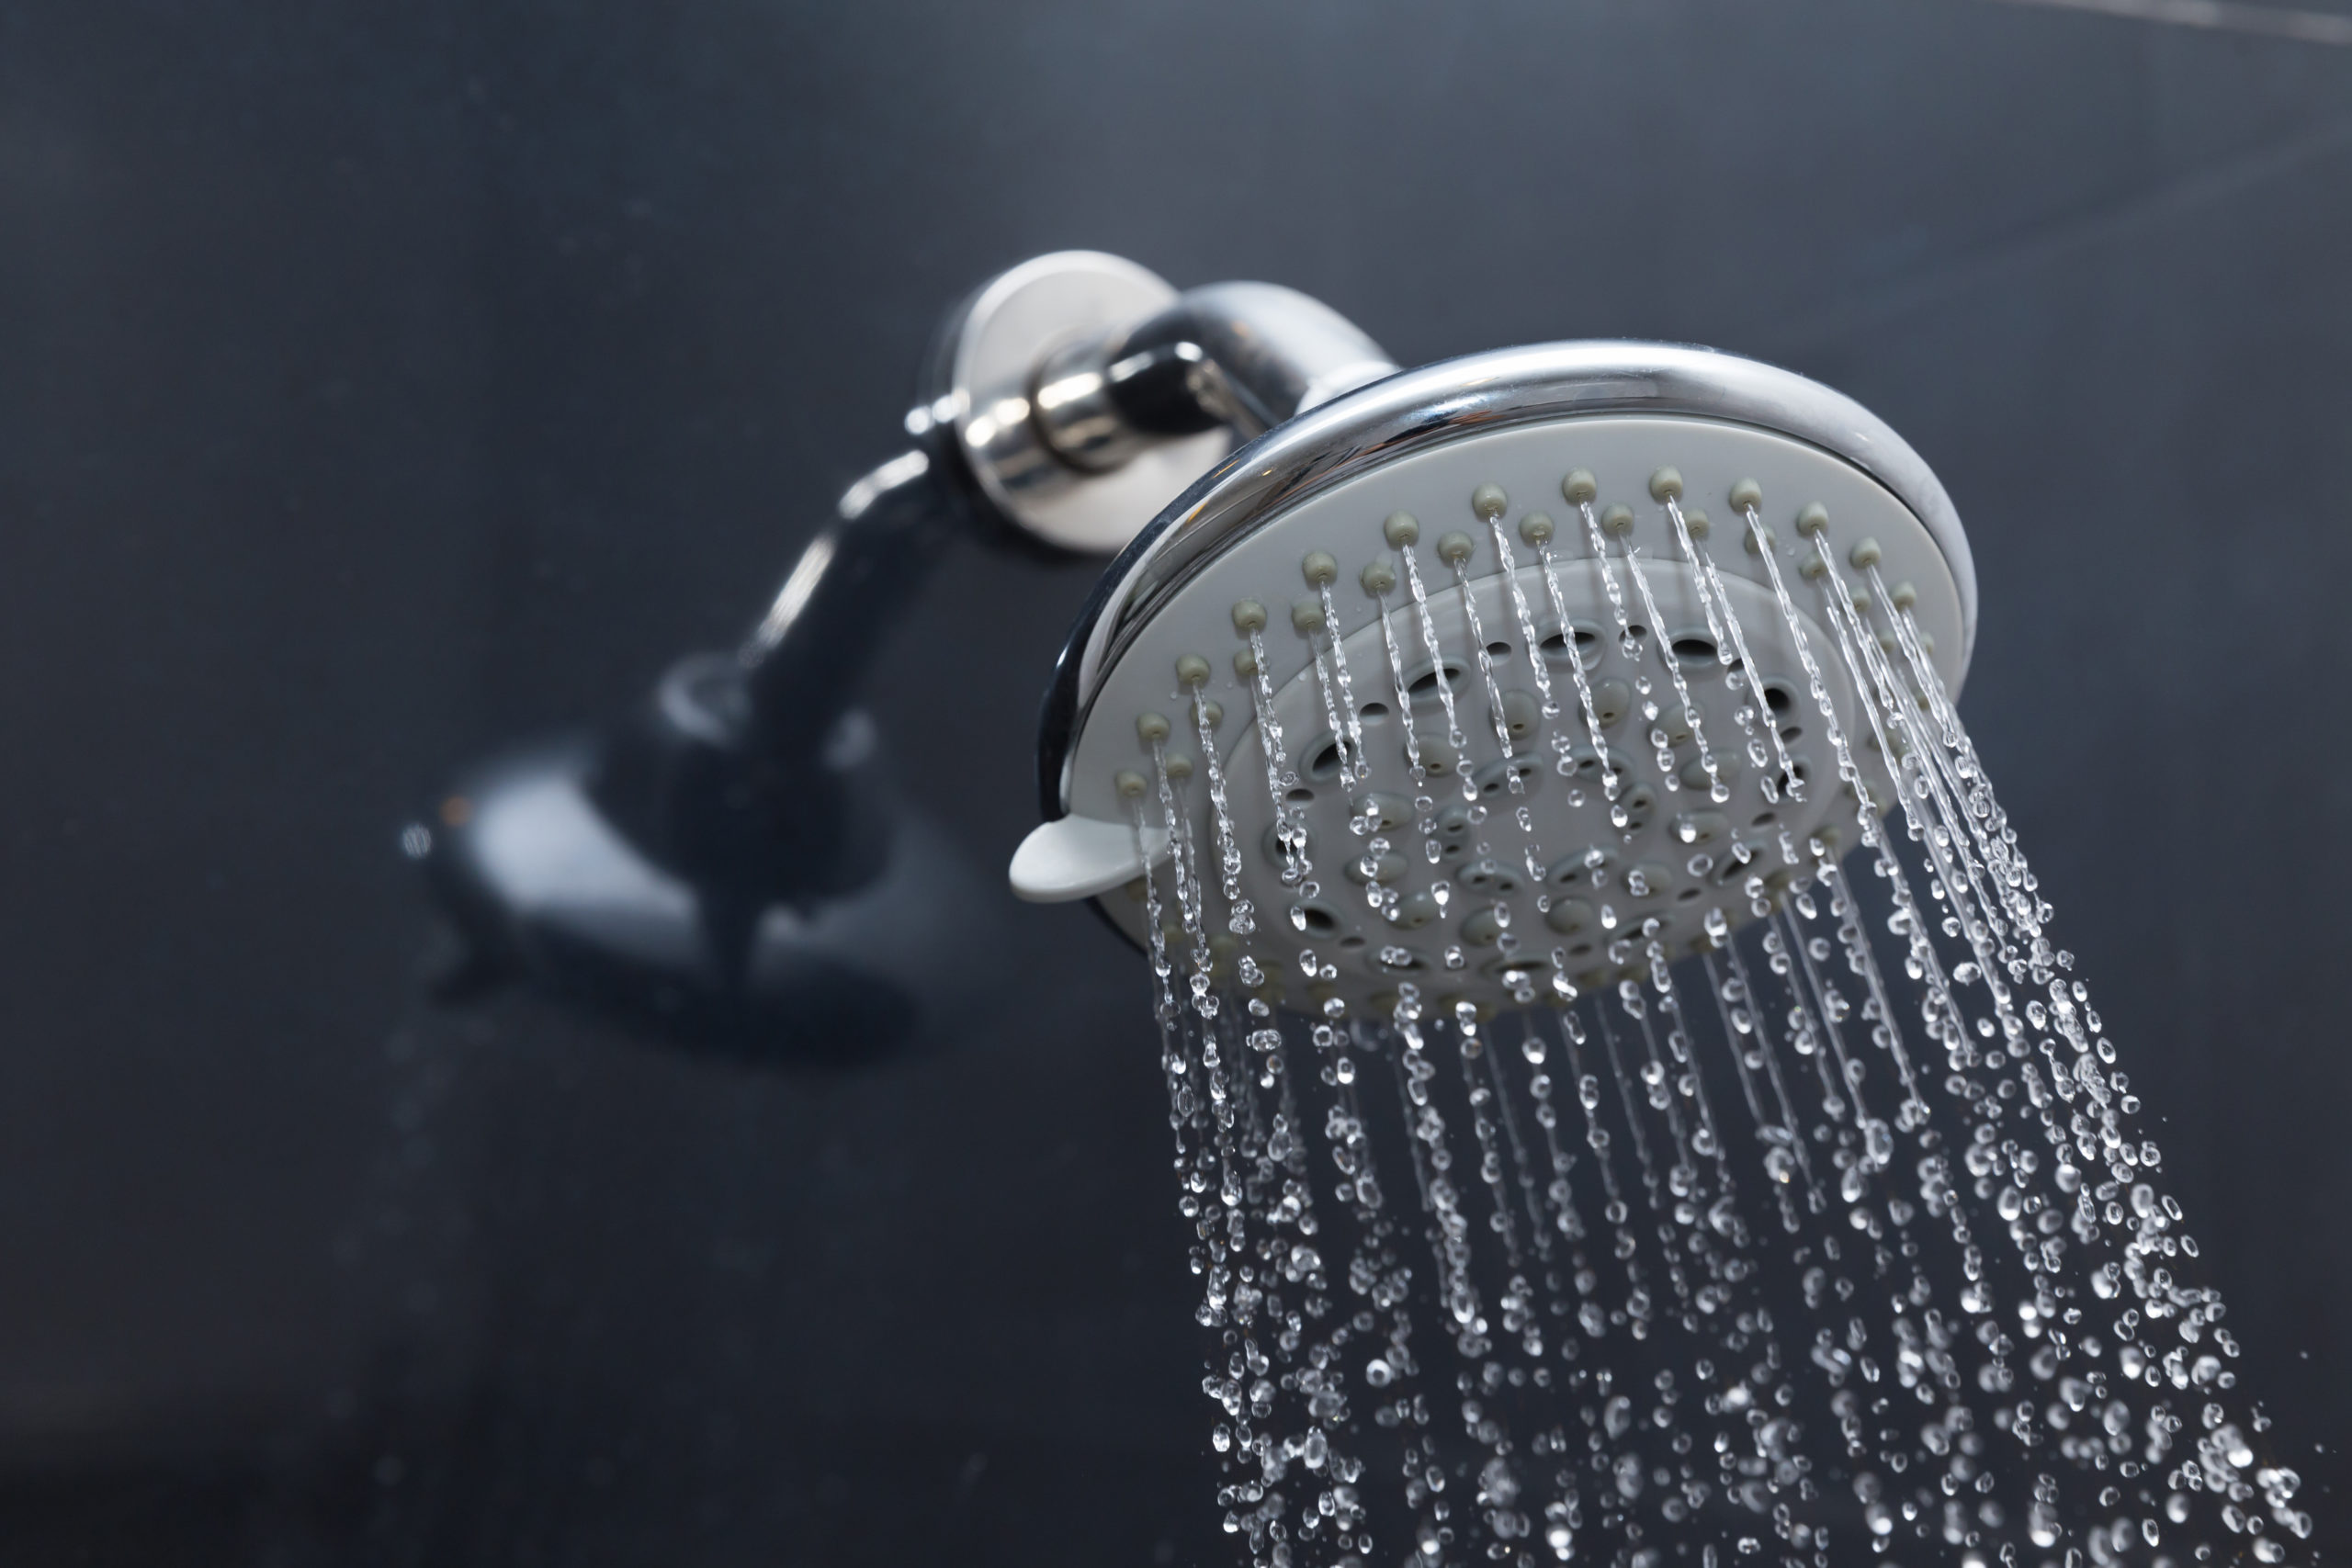 Why Is My Shower Head Clogged?